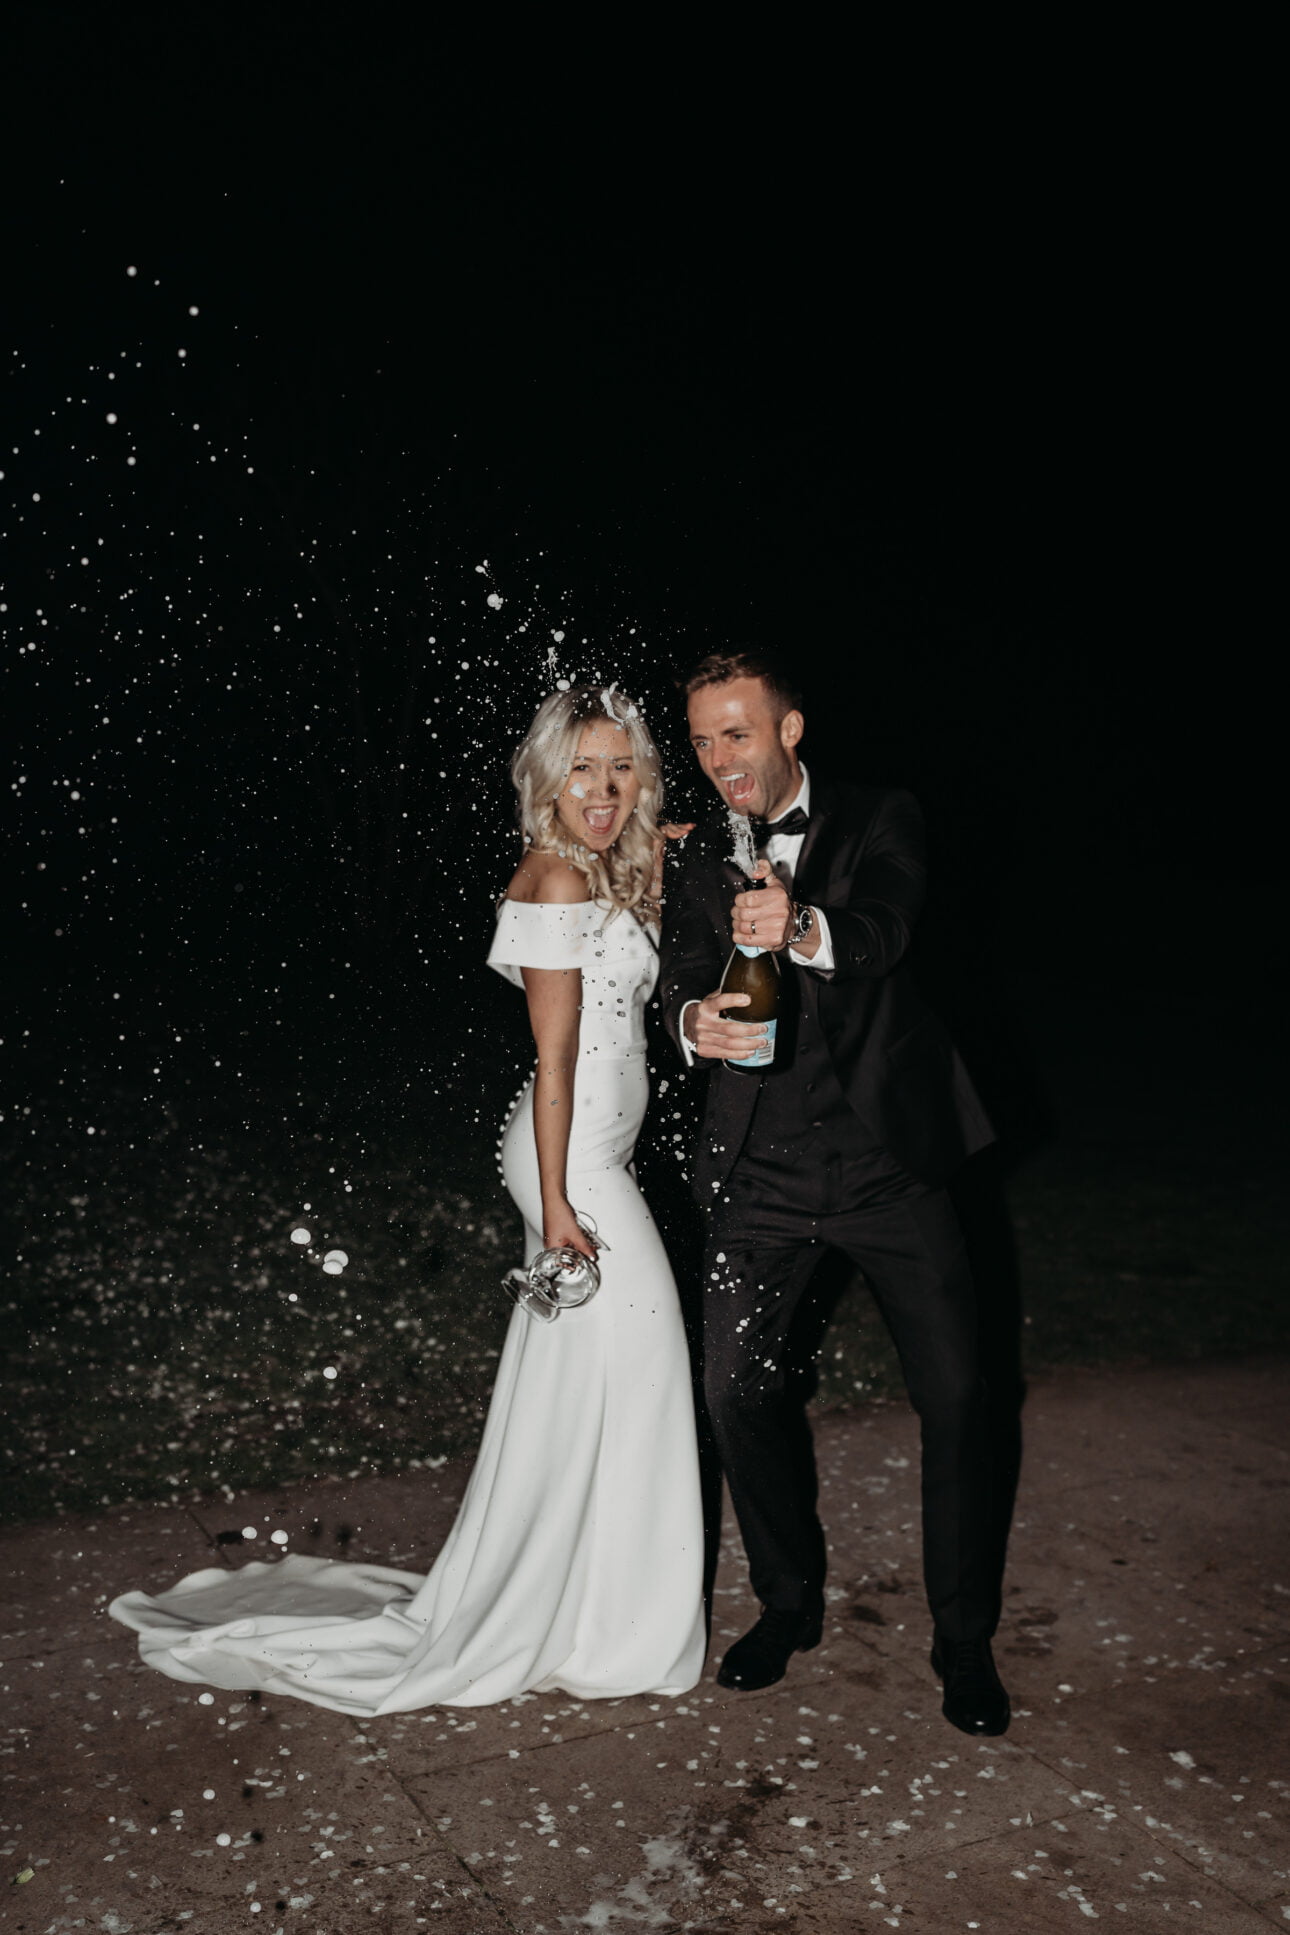 Bride and groom spraying champagne using flash photography